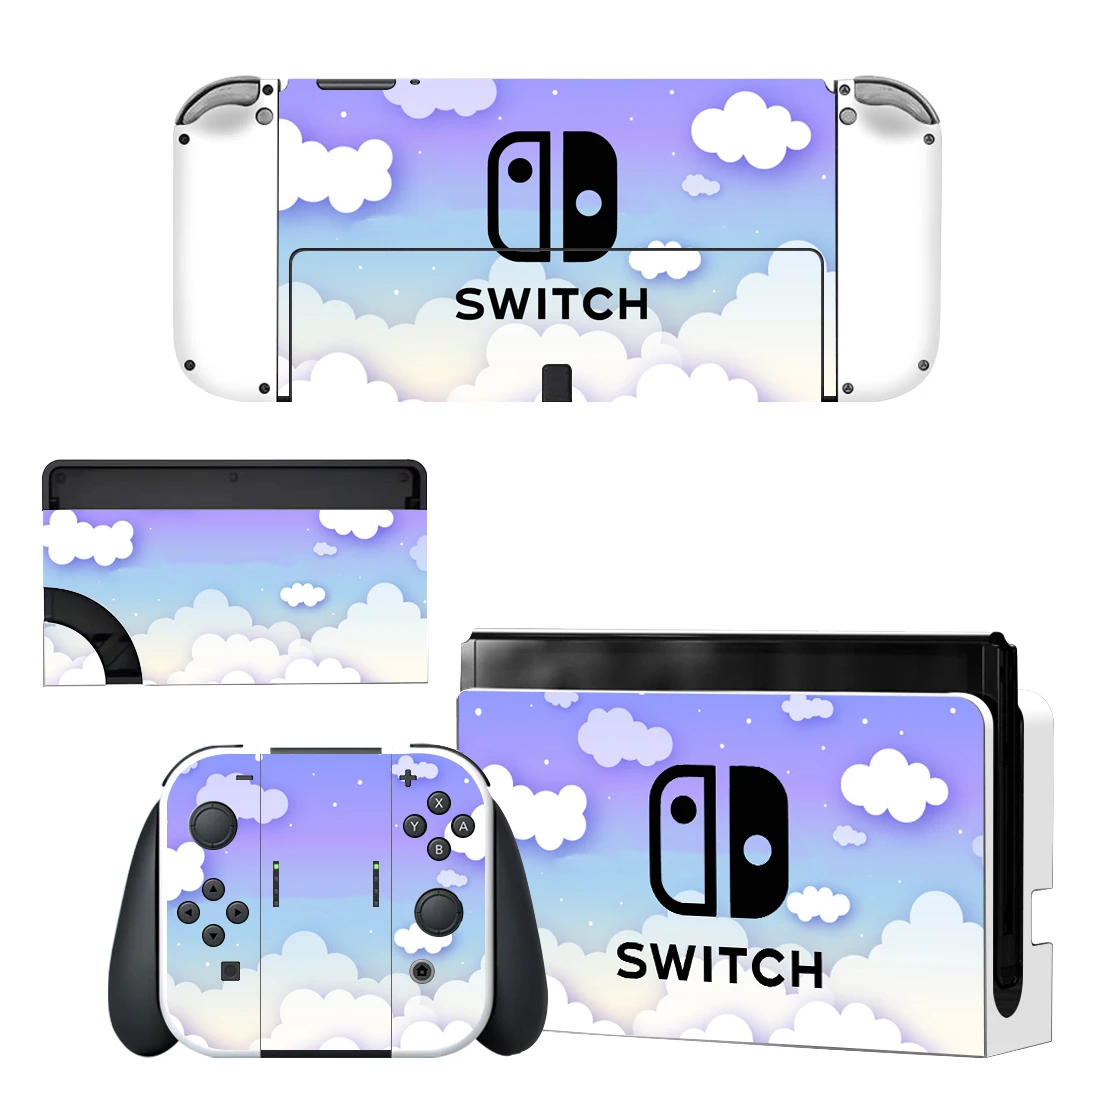 

Pure White Cloud Nintendoswitch Skin Cover Sticker Decal for Nintendo Switch OLED Console Joy-con Controller Dock Skin Vinyl